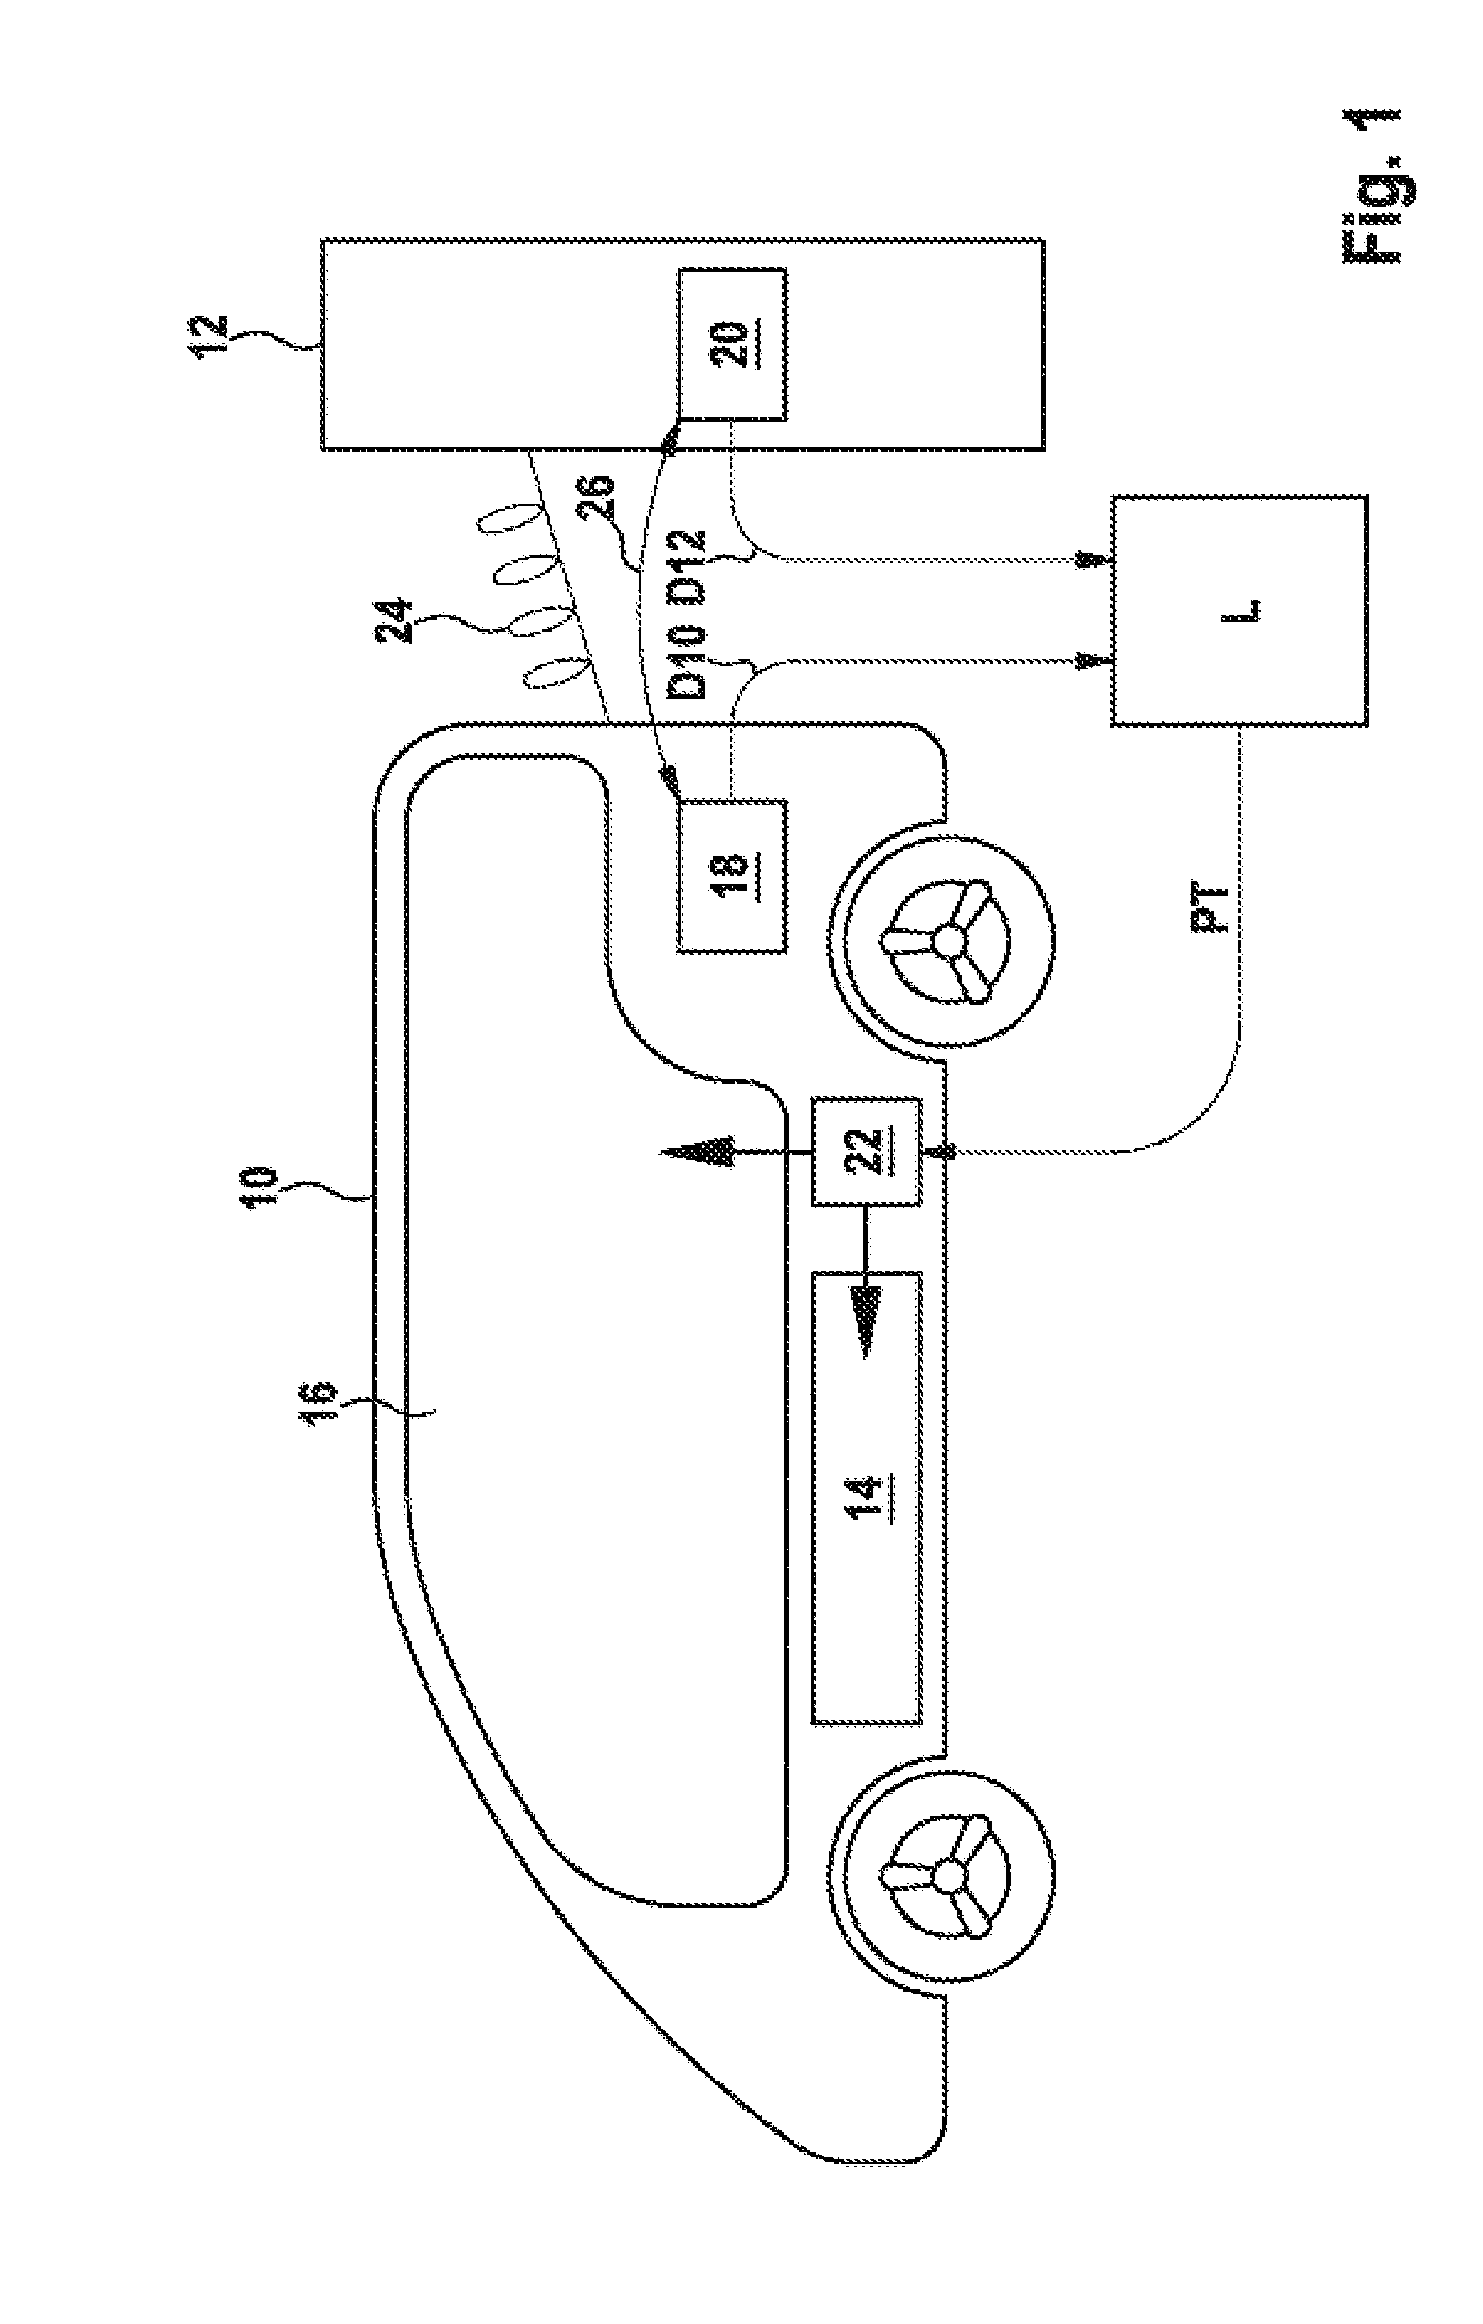 Method for controlling the temperature of a vehicle with at least a partial electric drive, vehicle and charging station